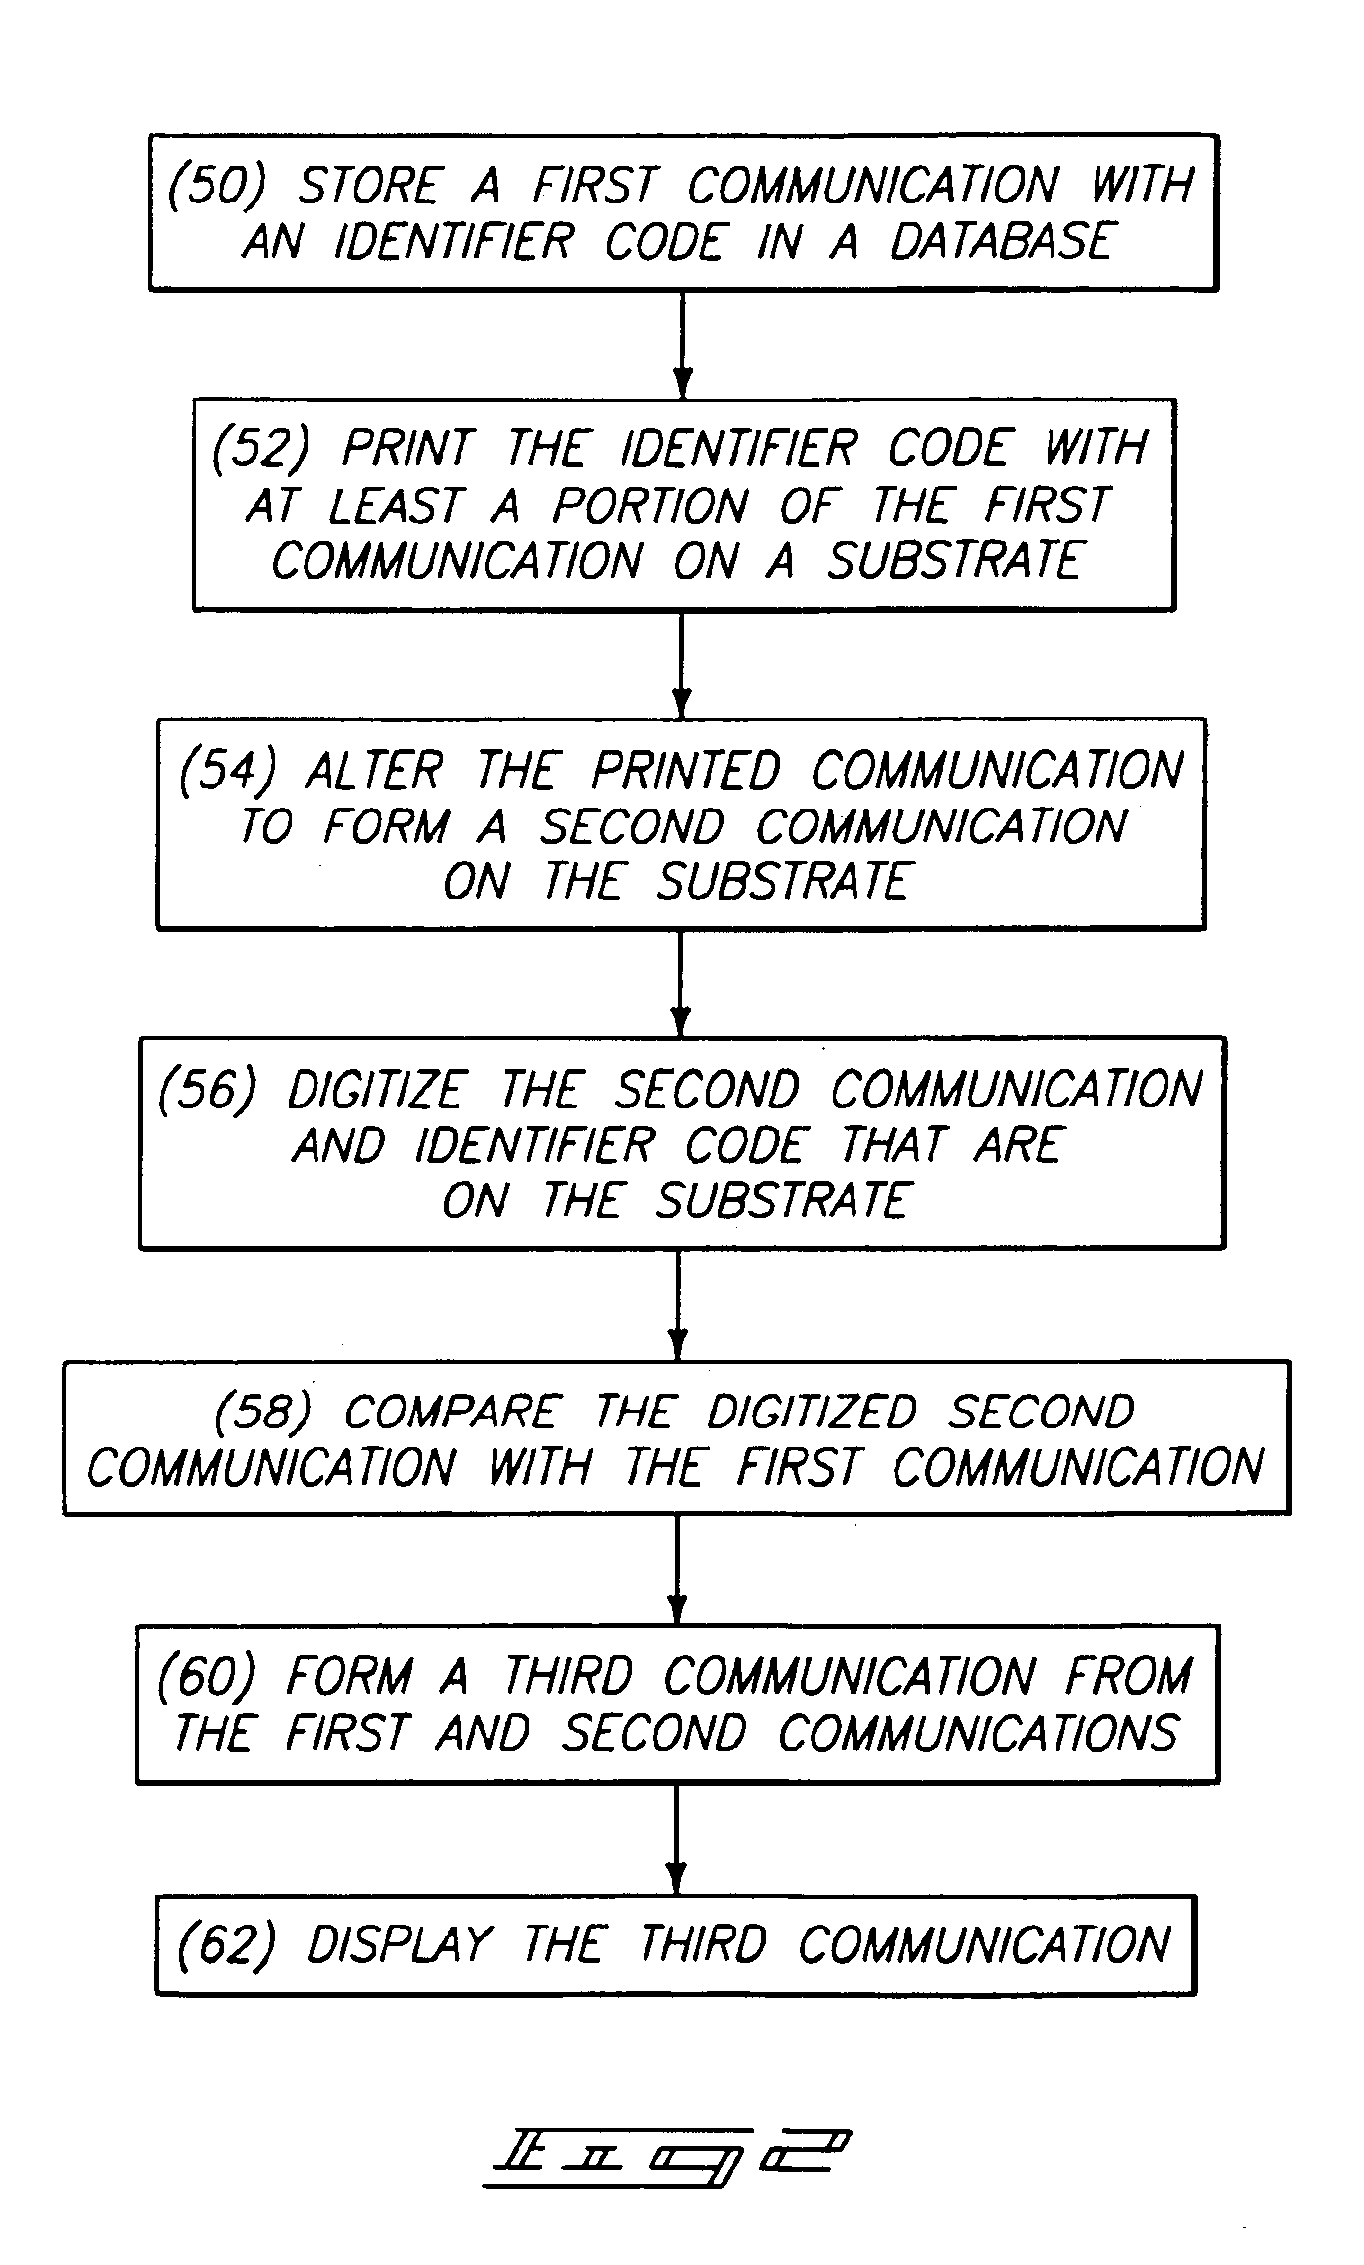 Methods of storing and retrieving information, and methods of document retrieval